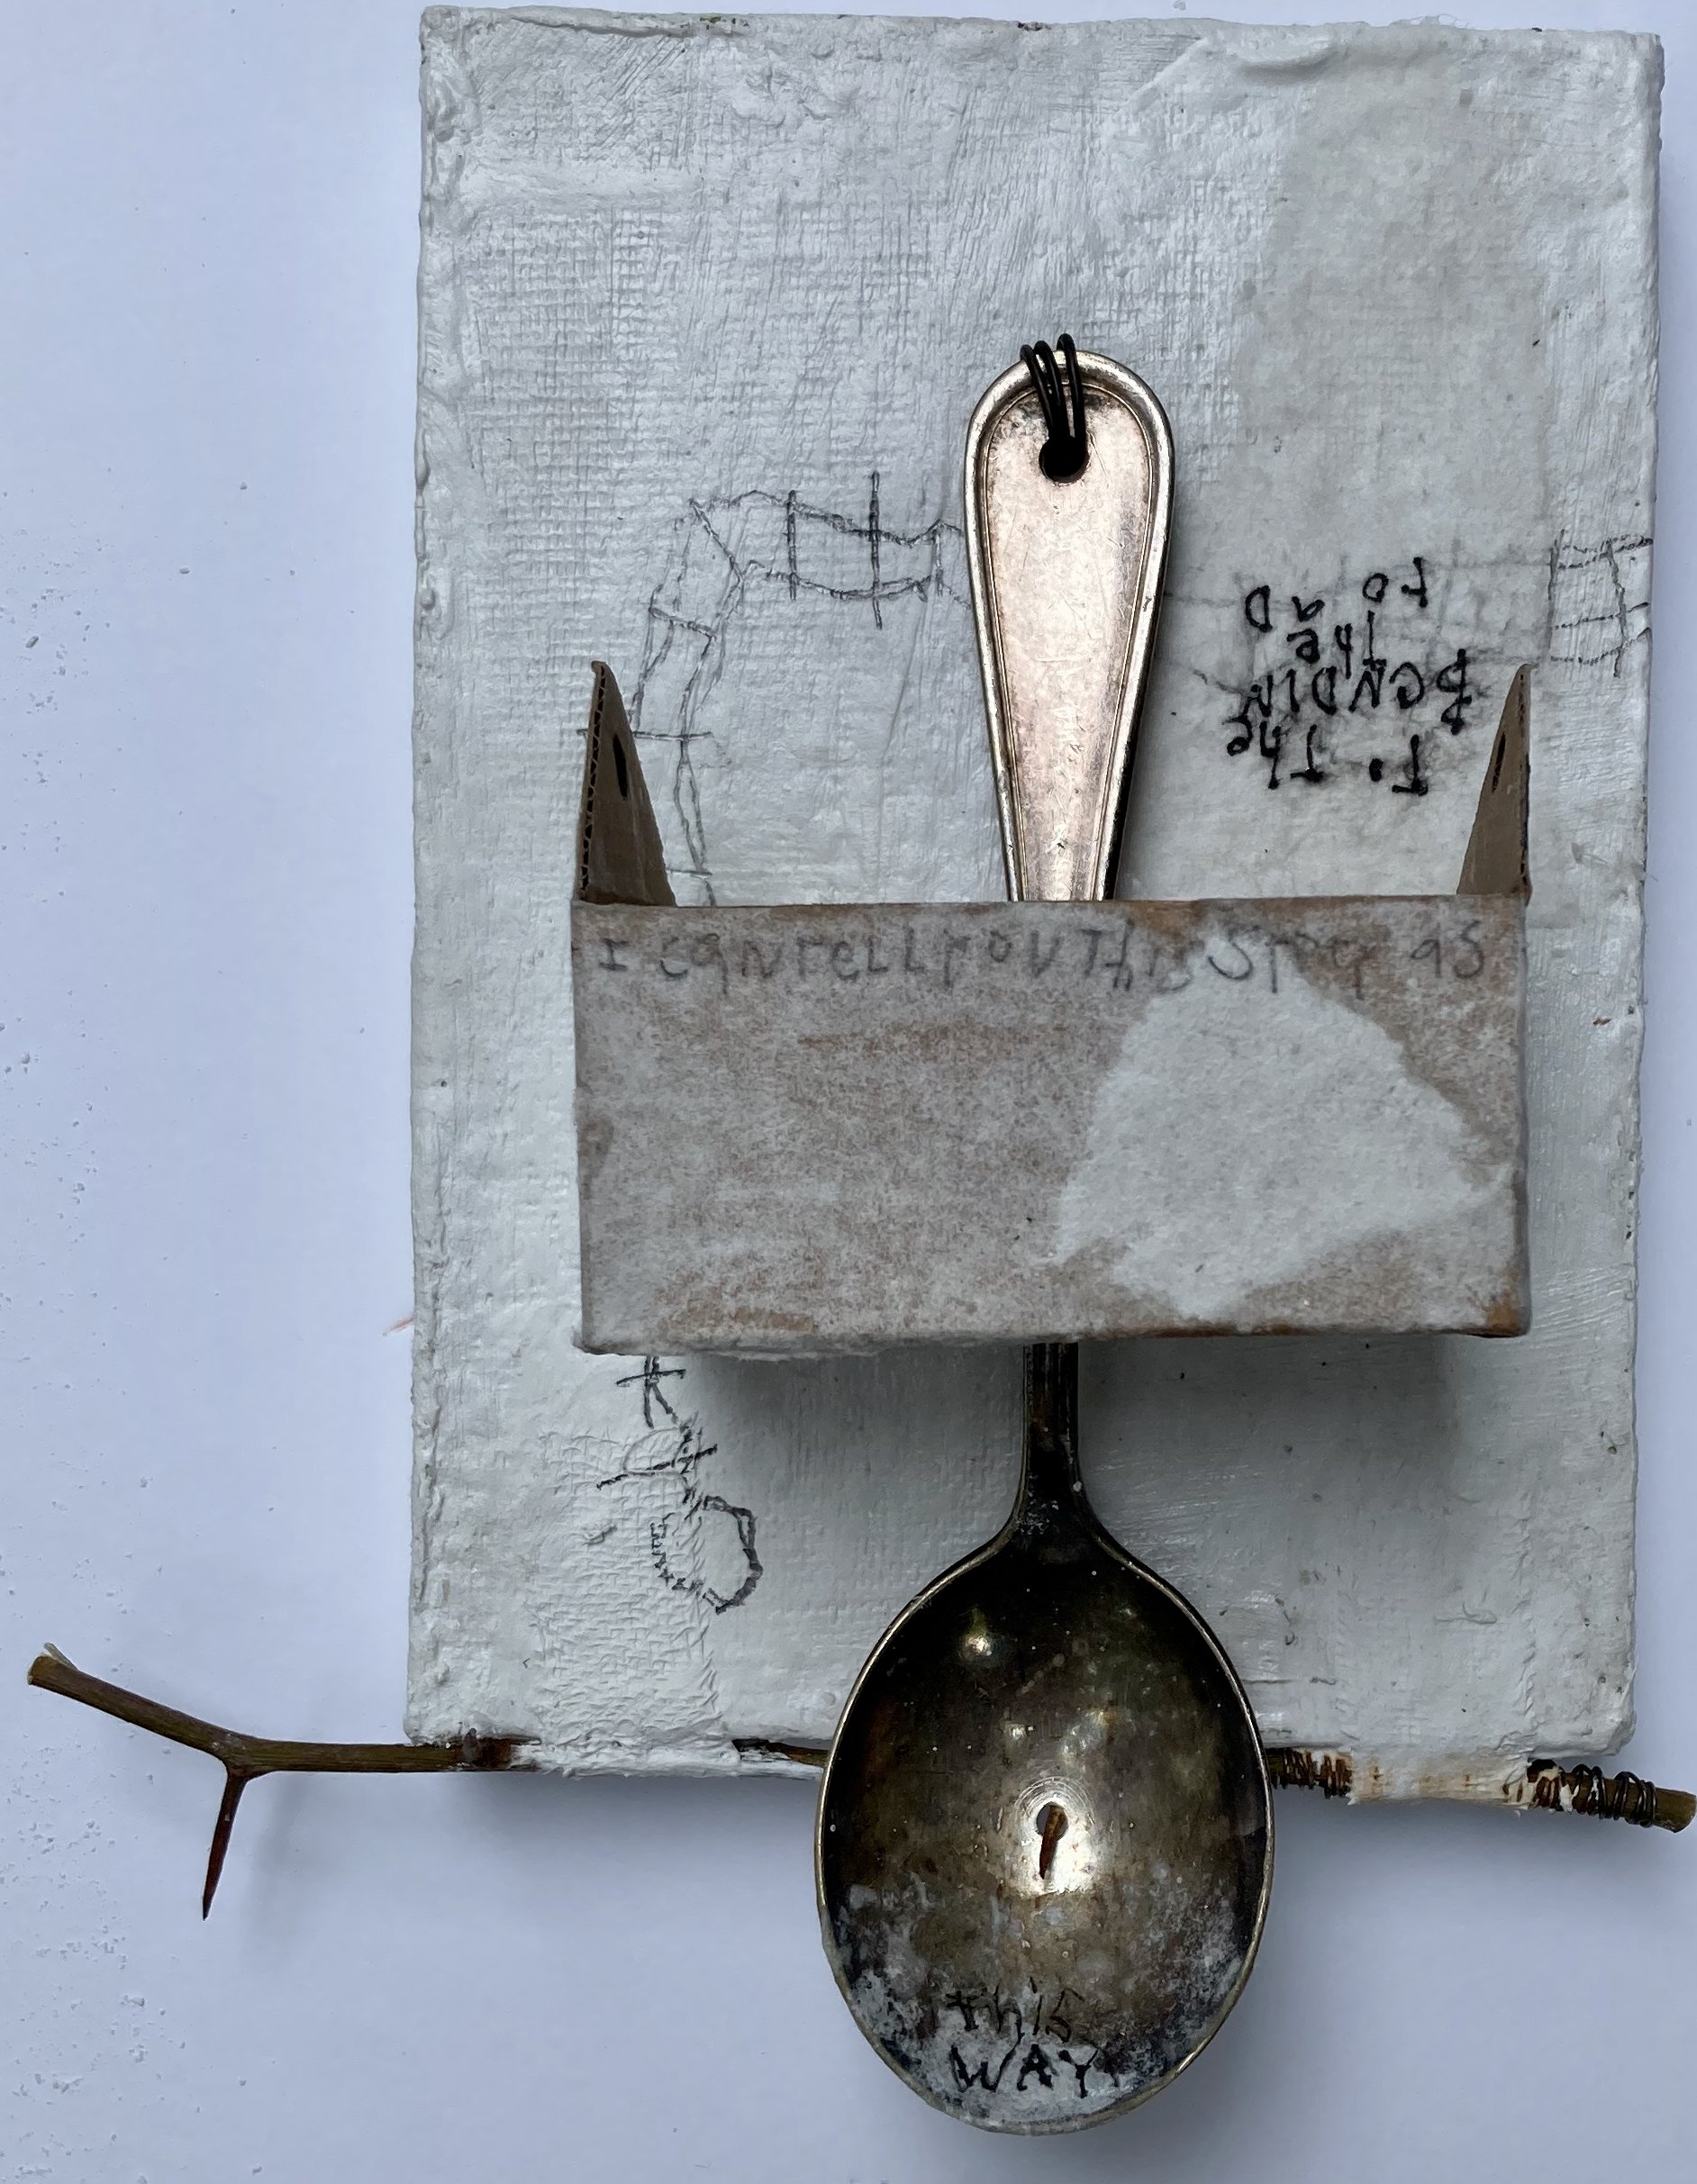 SIMPLE TOOLS FOR SURVIVAL, 2023. Plaster, cardboard, graphite, ink on panel, 8.5 x 5”. Private collection. 